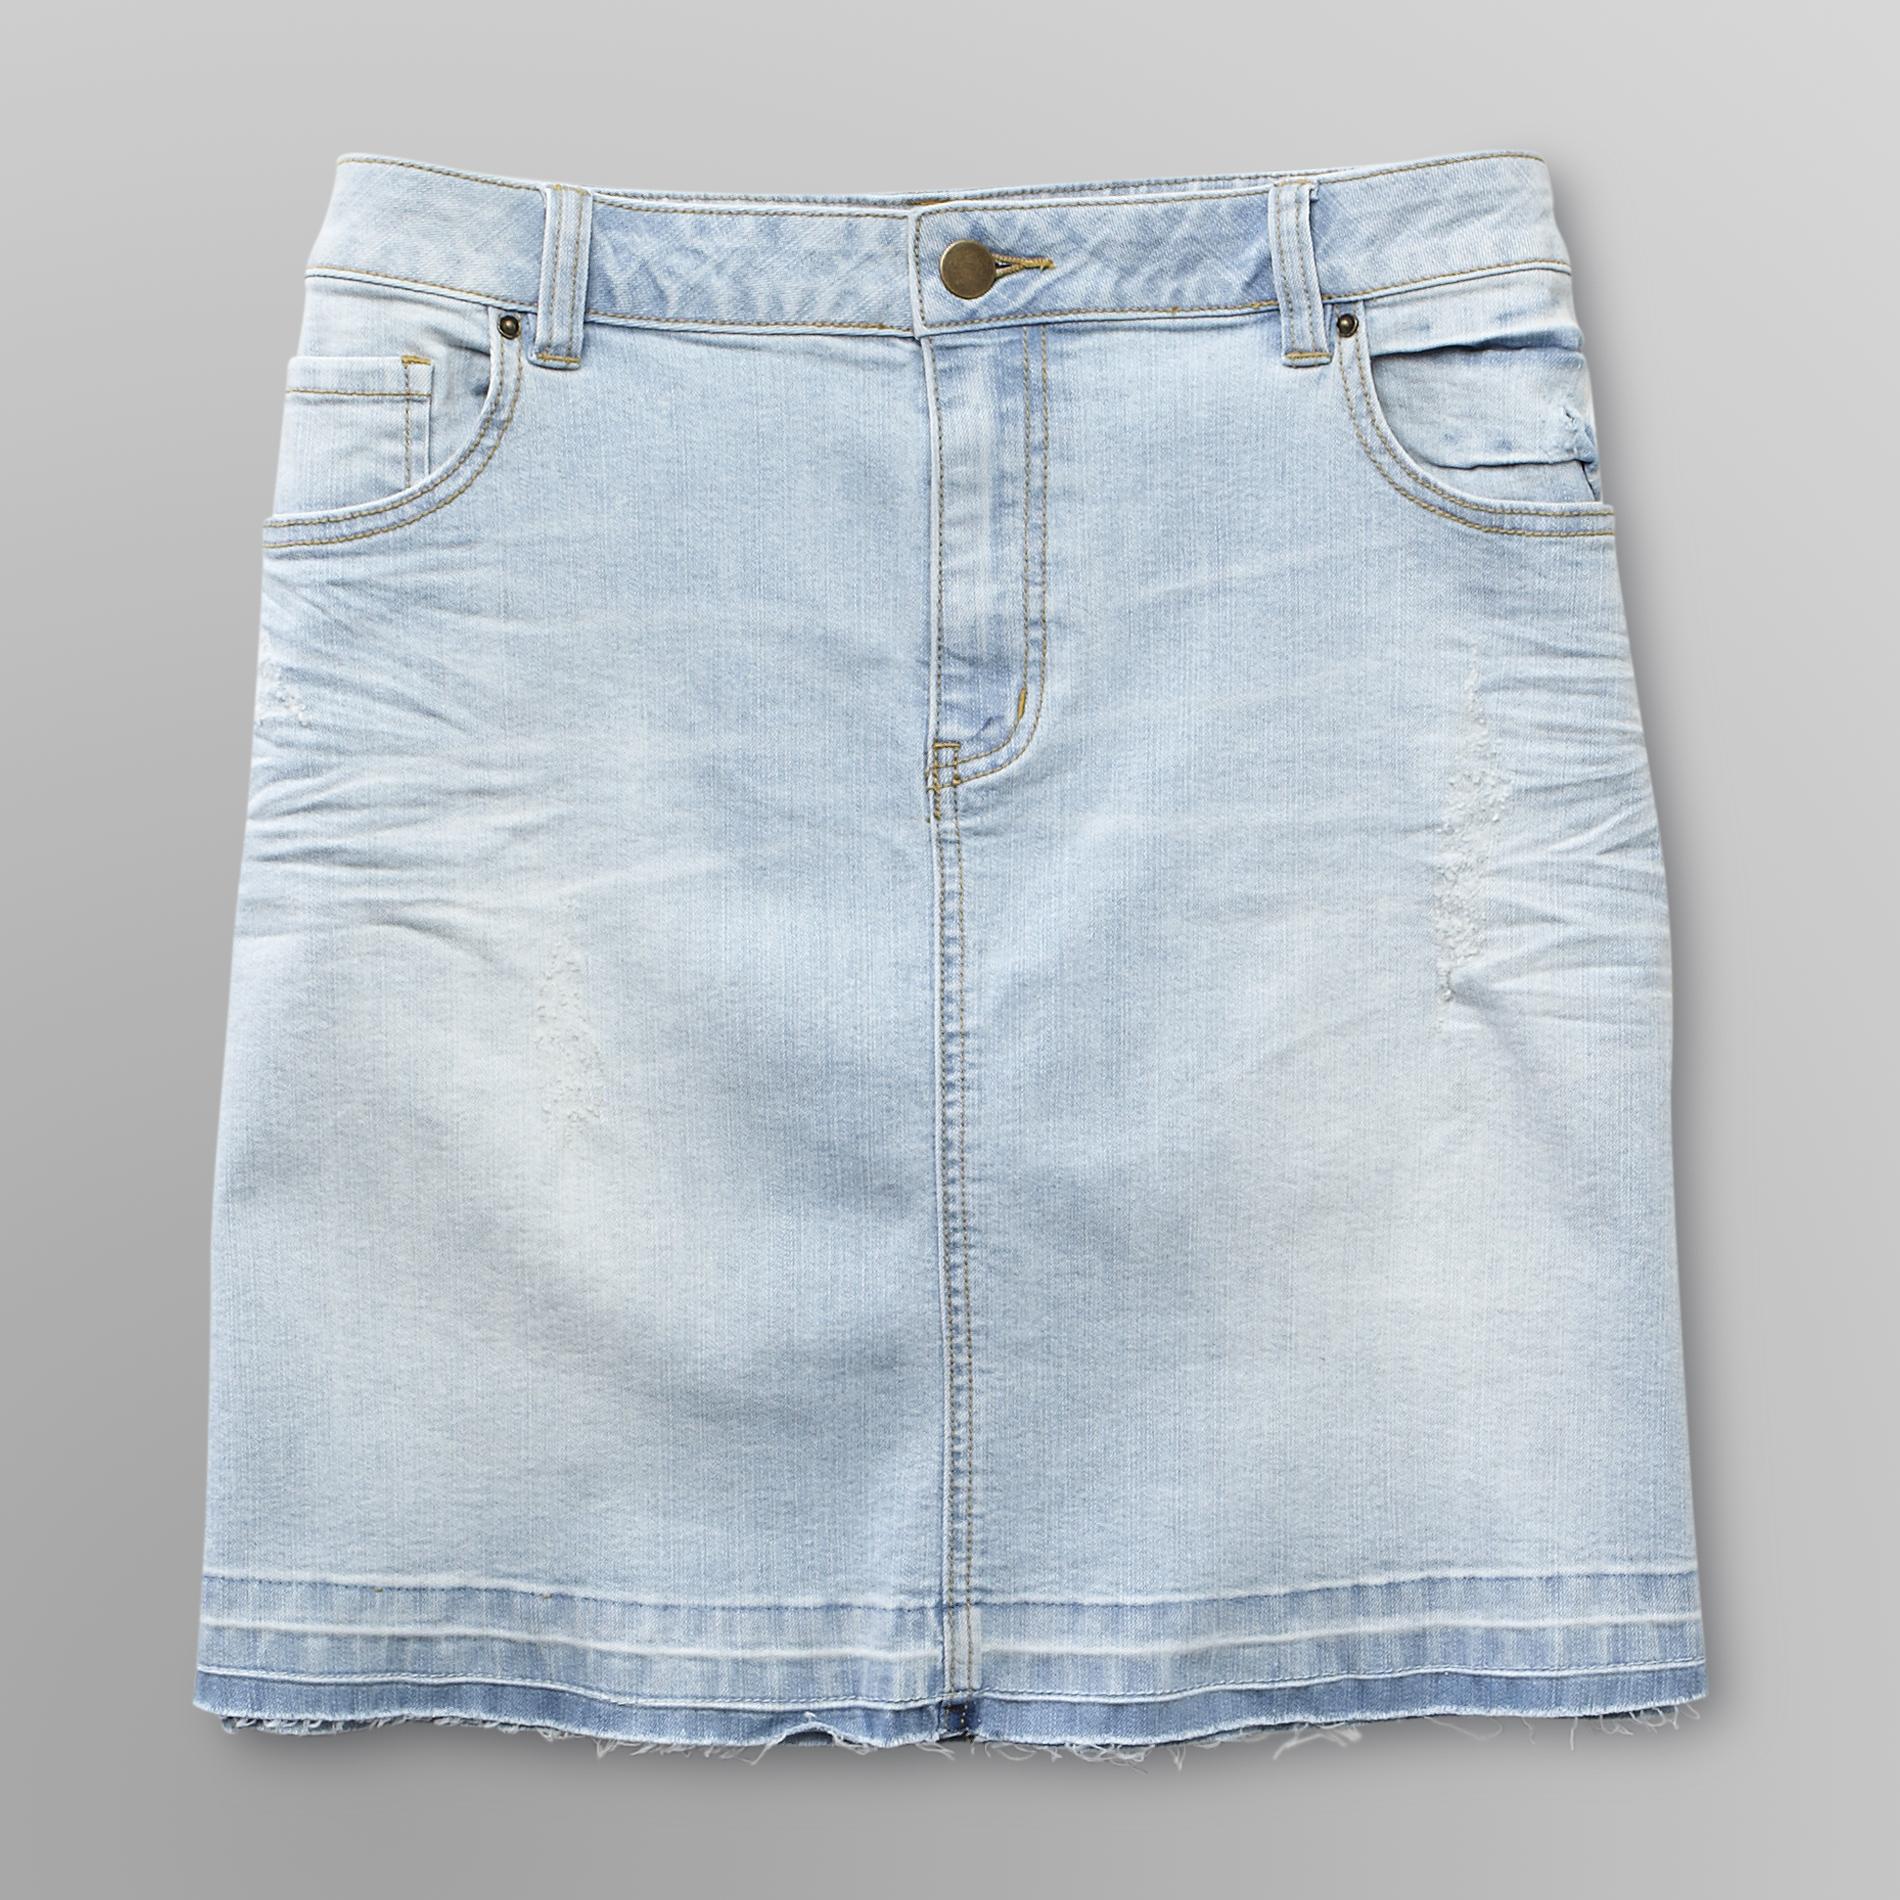 Love Your Style, Love Your Size Women's Plus Denim Skirt